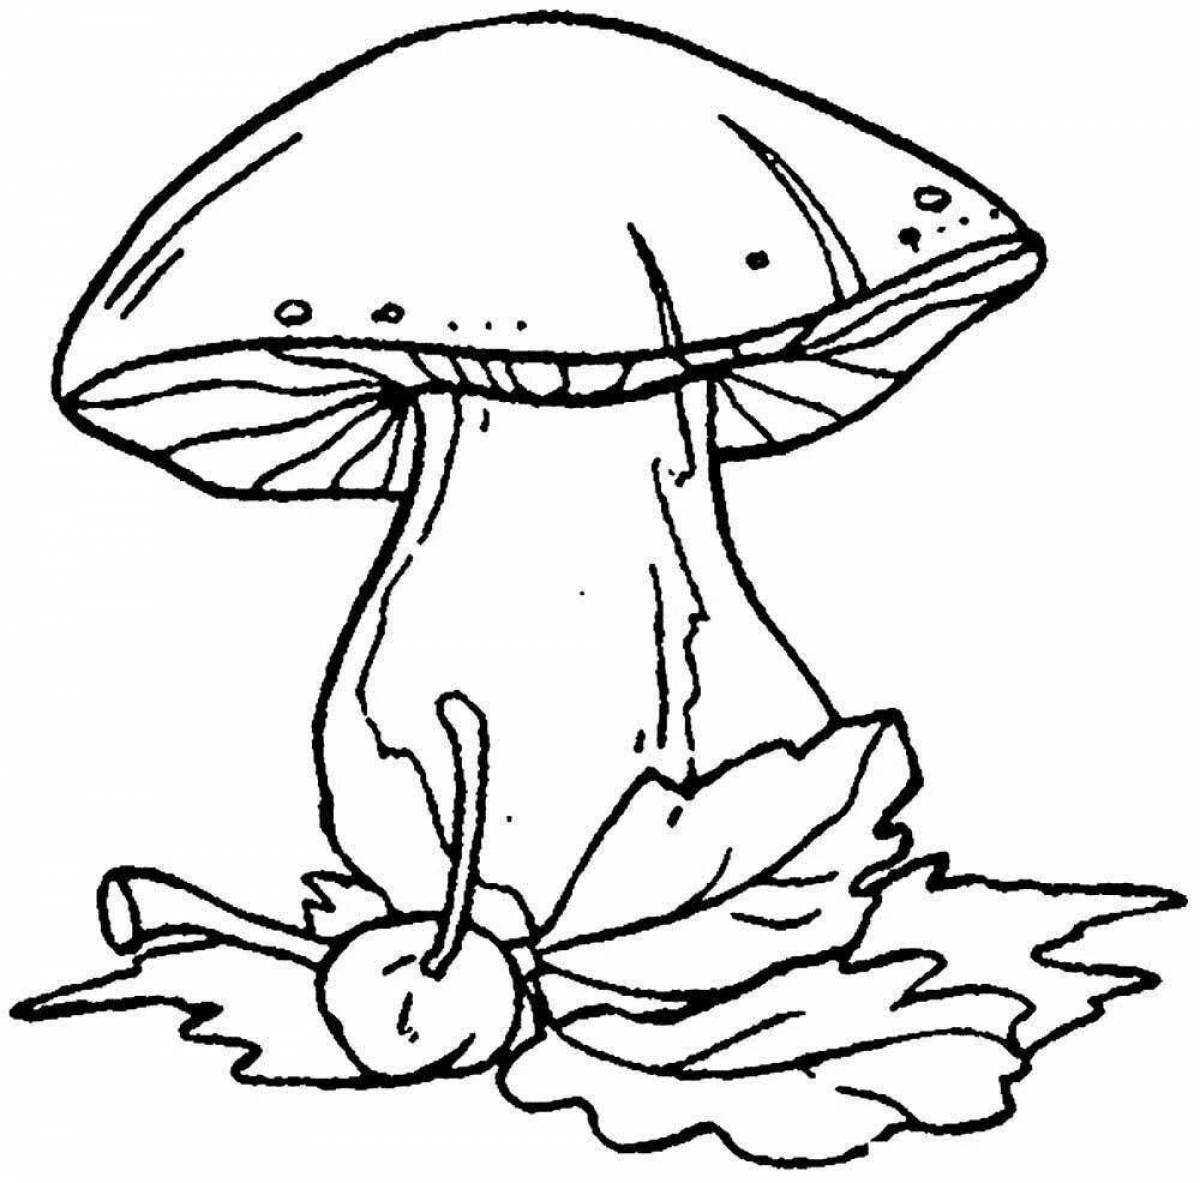 Glowing mushrooms coloring book for 4-5 year olds